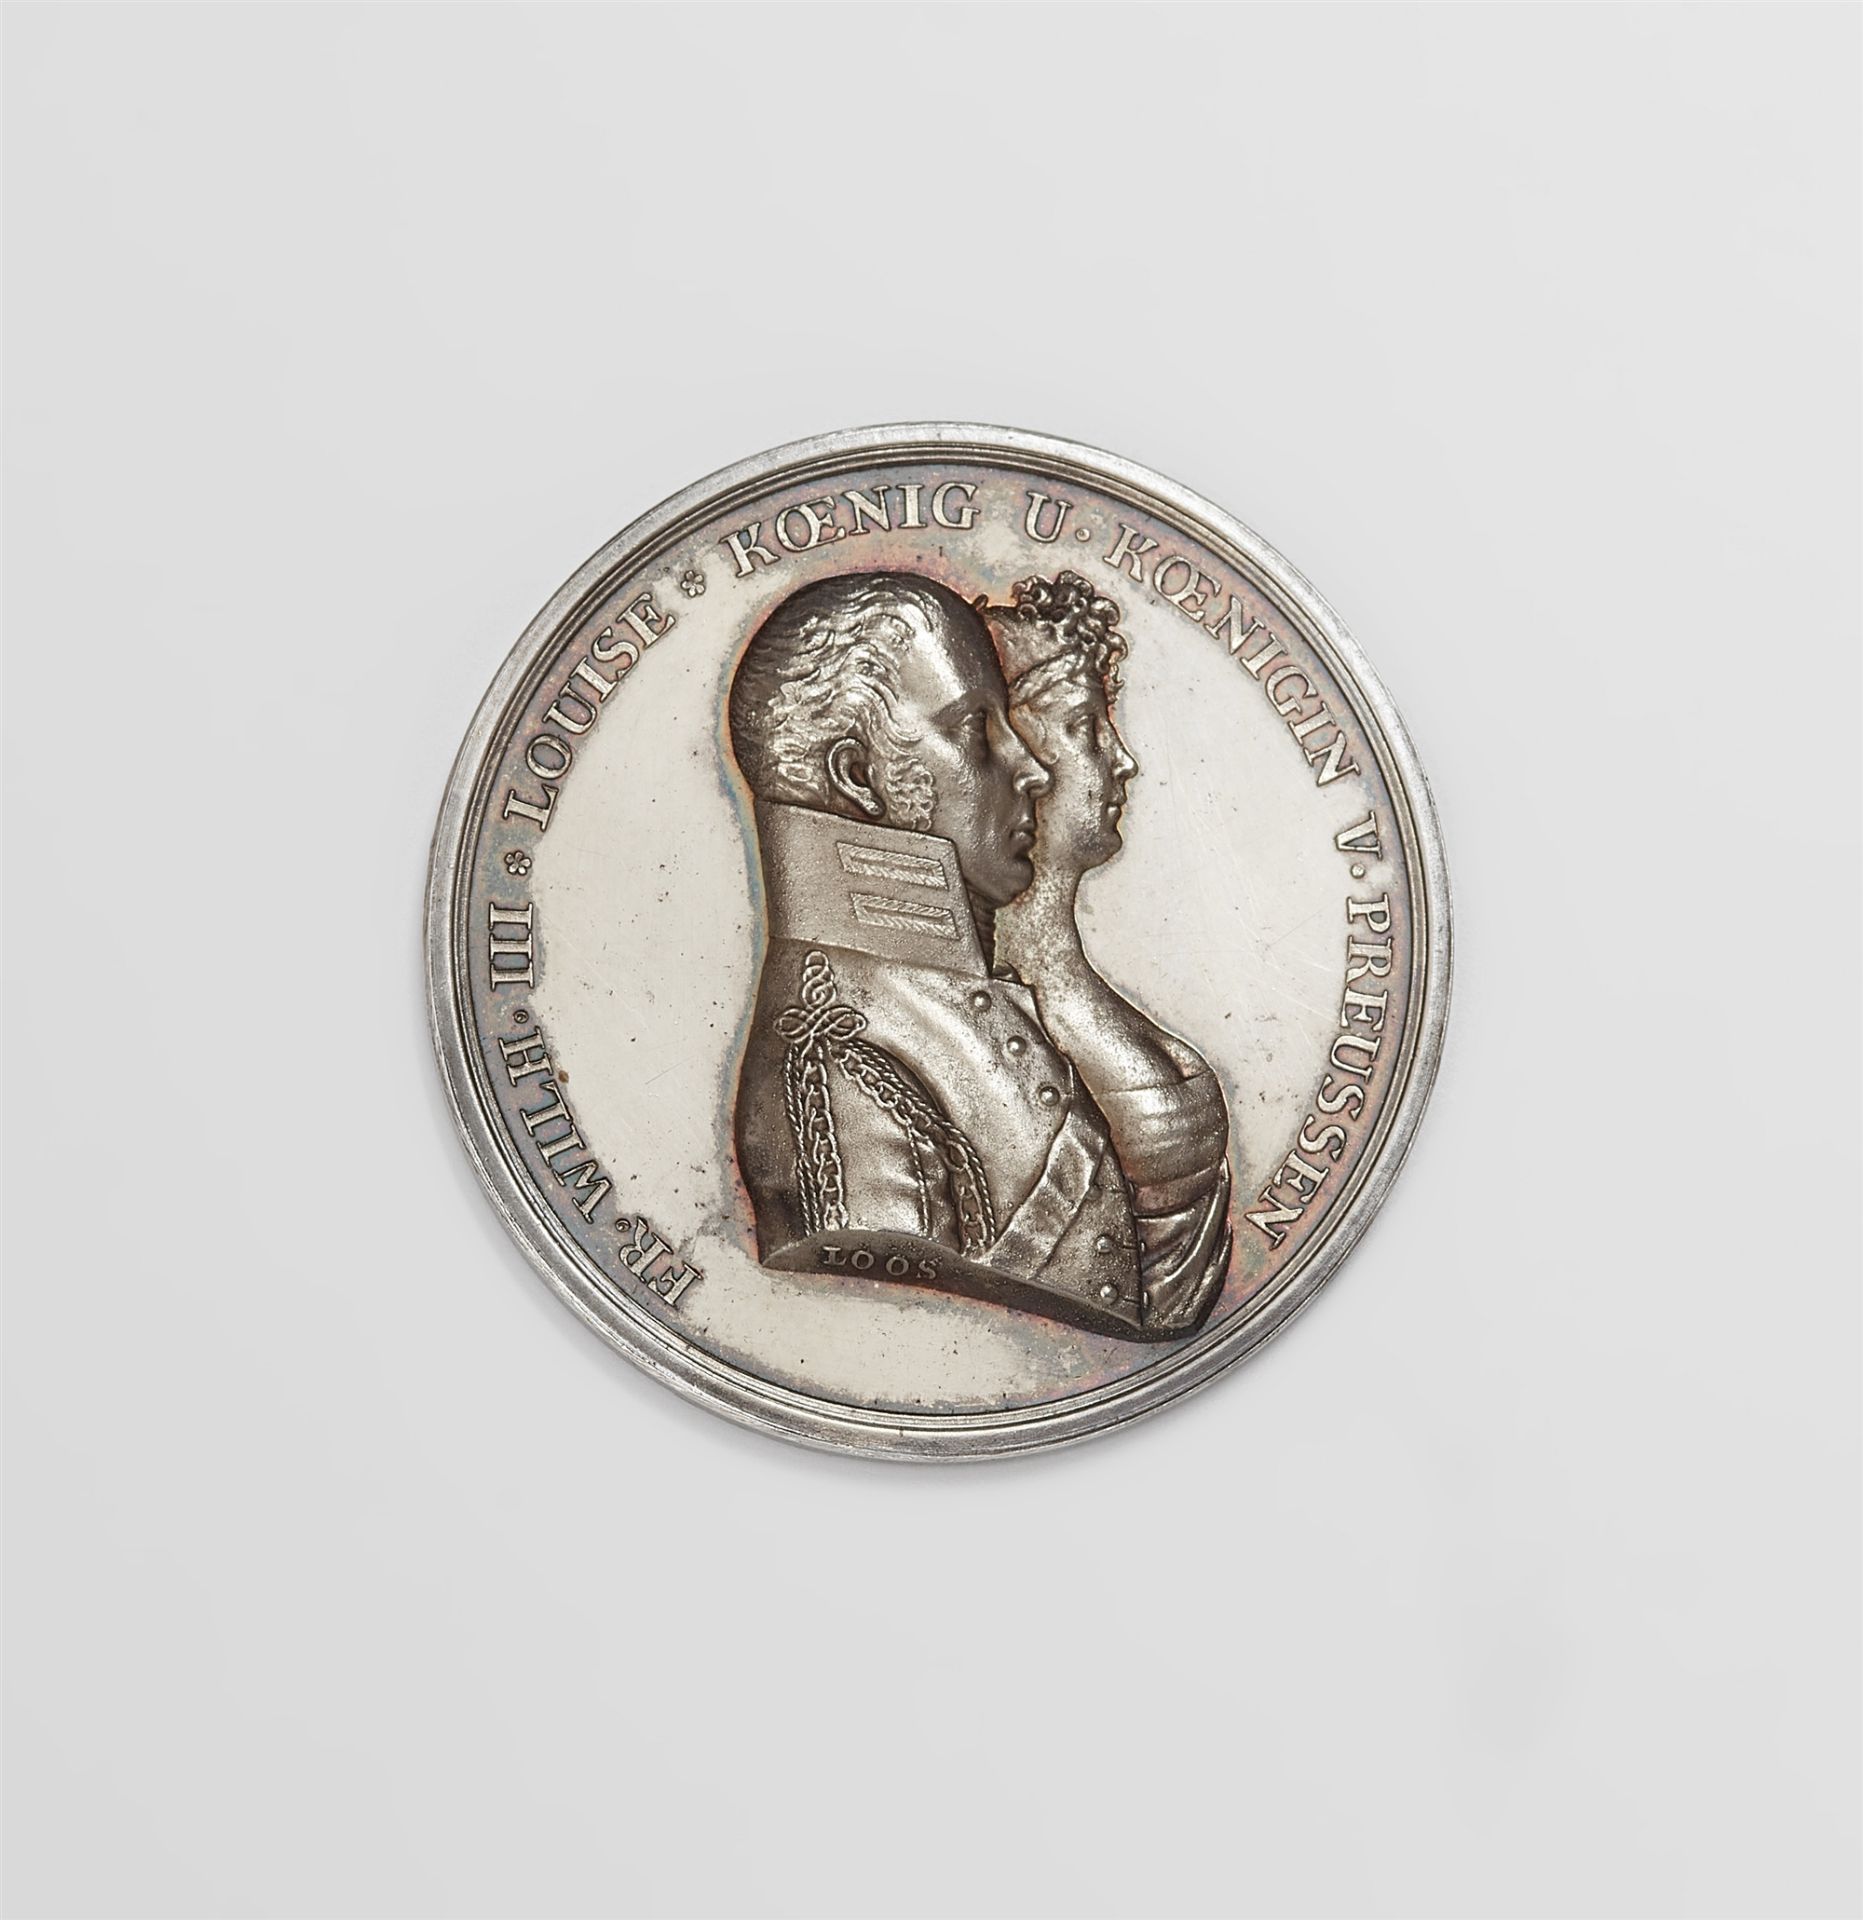 A silver medal commemorating King Frederick William III and Queen Louise